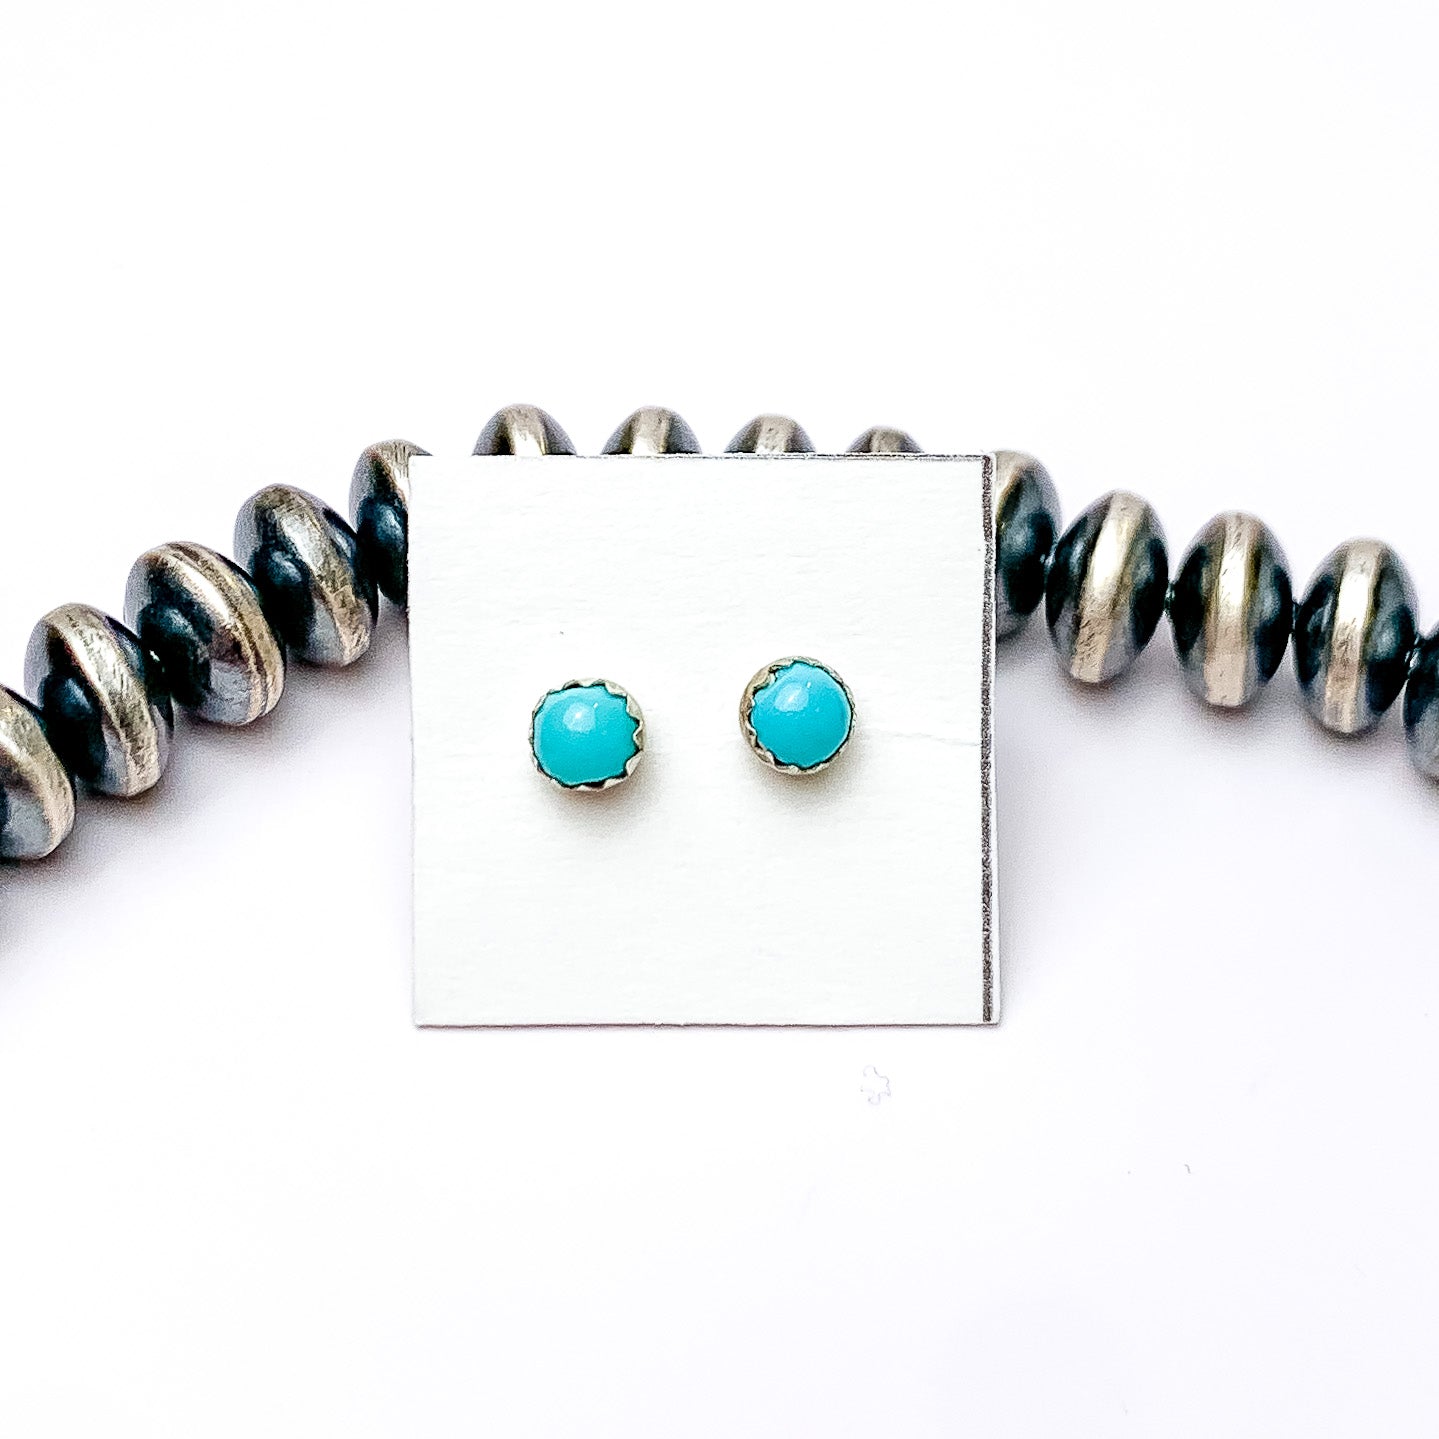 Linda Yazzie | Navajo Handmade Tiny Sterling Silver and Turquoise Stud Earrings - Giddy Up Glamour Boutique